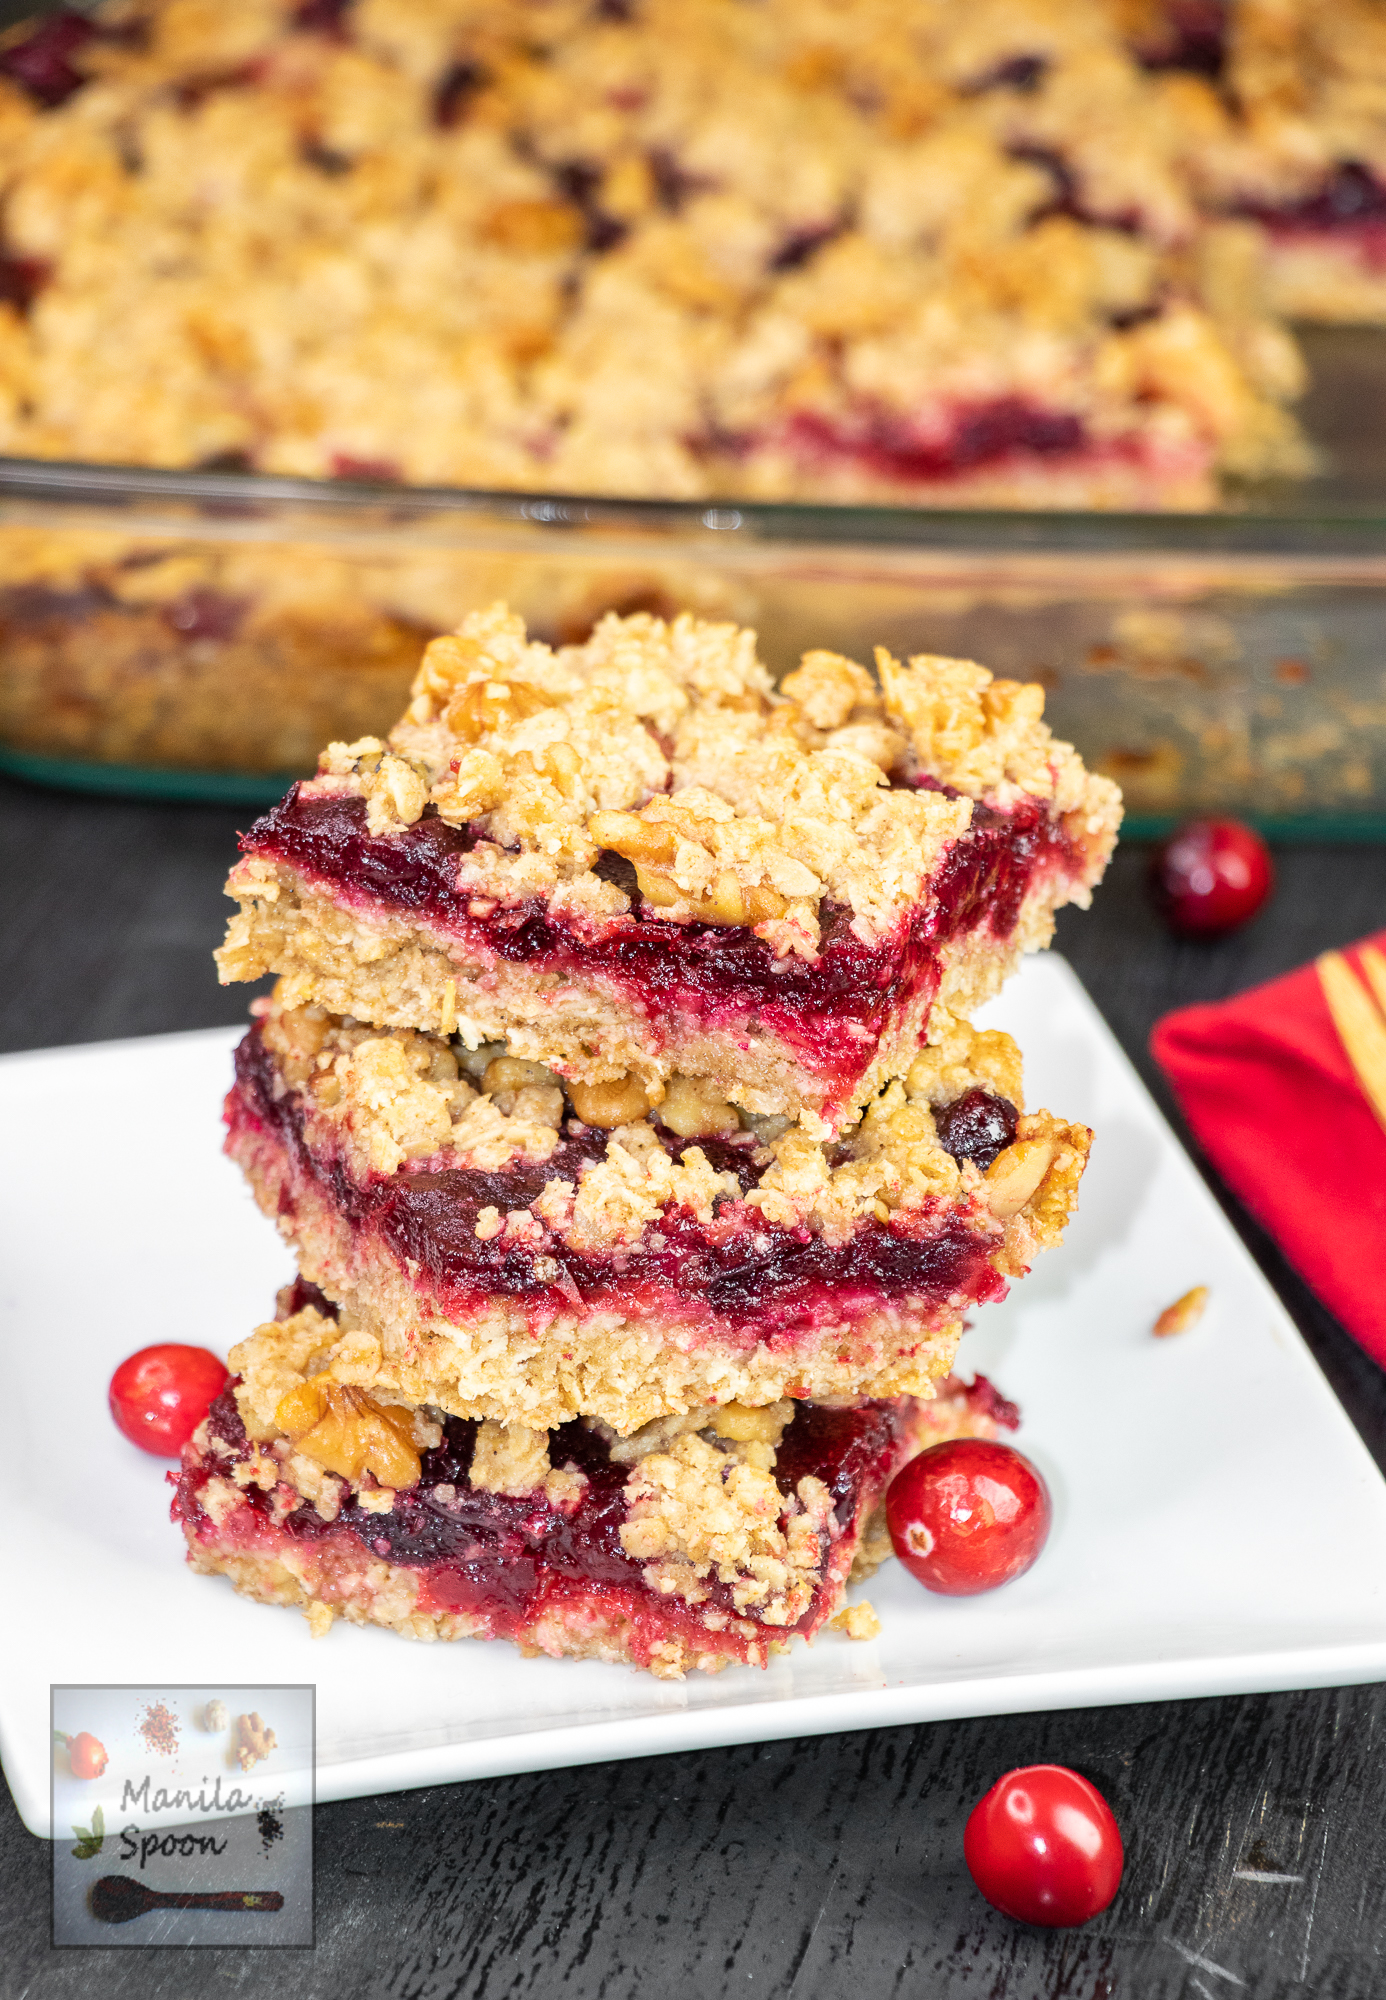 With a perfect balance of sweet and tart these scrumptious cranberry oat bars are the perfect holiday treat! The addition of chopped walnuts give them a nutty crunch that brings these yummy bars over the top. These bars can be made completely gluten-free and tastes as deliciously good!